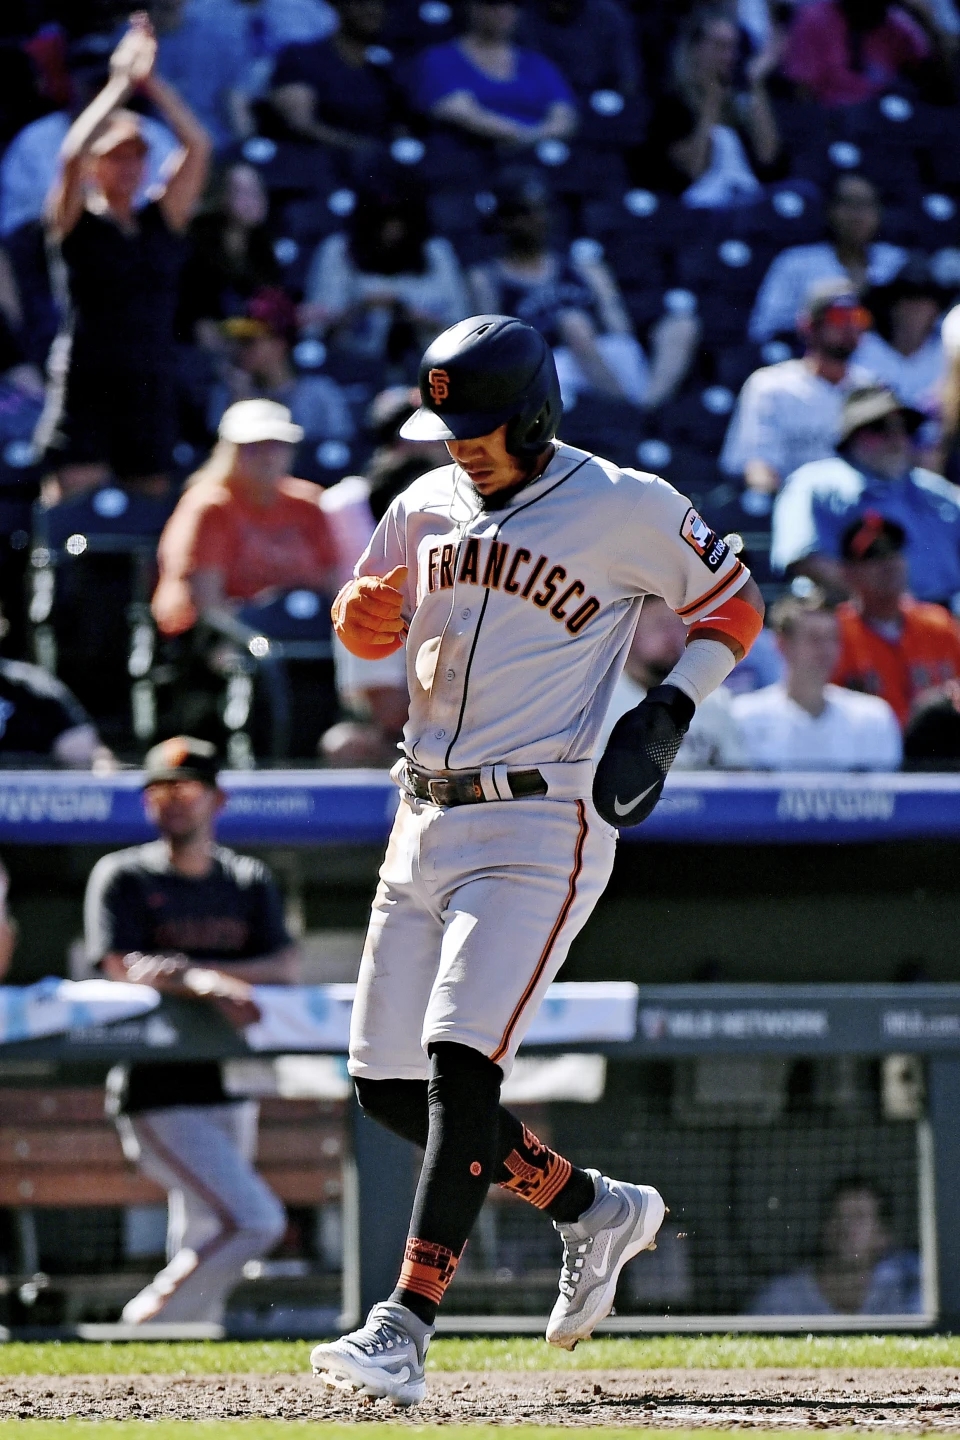 San Francisco Giants podcast with Marko Ukalovic Giants win Sunday now 2 games back in NL Wild Card race; SF opens two game set in Arizona Tuesday